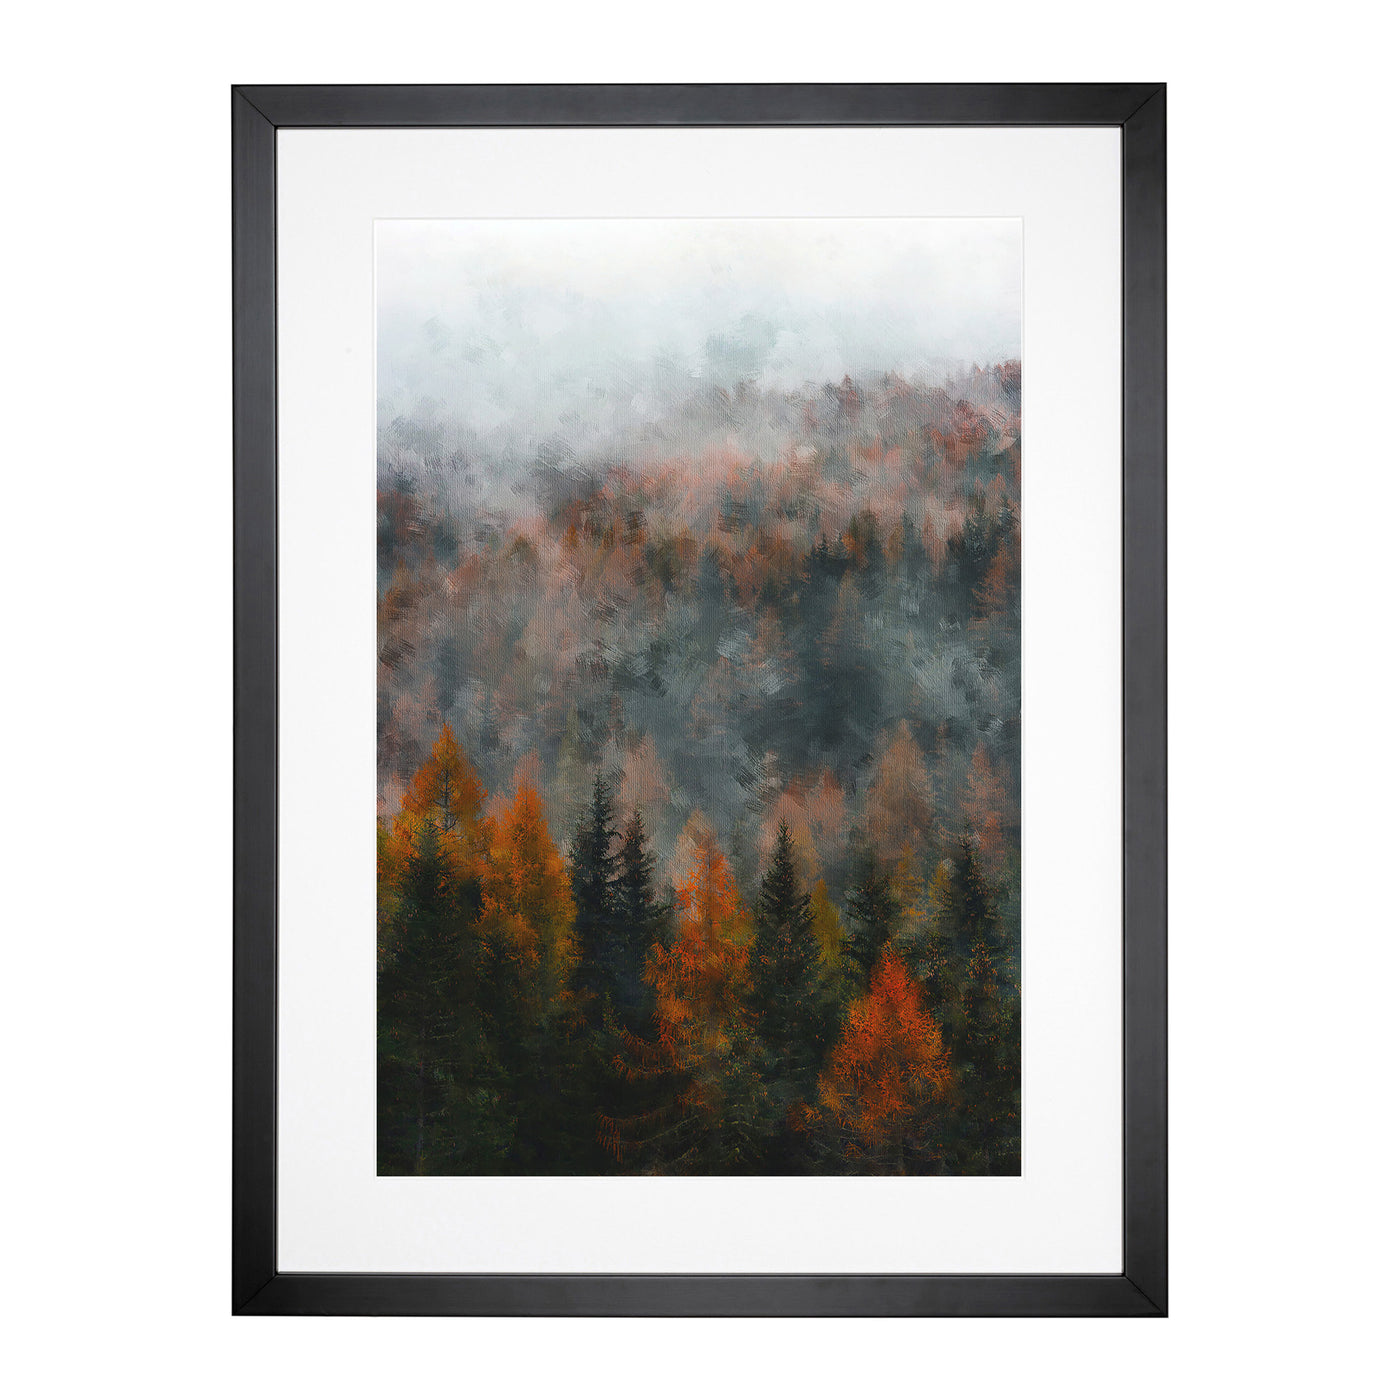 Misty Forest In The Autumn